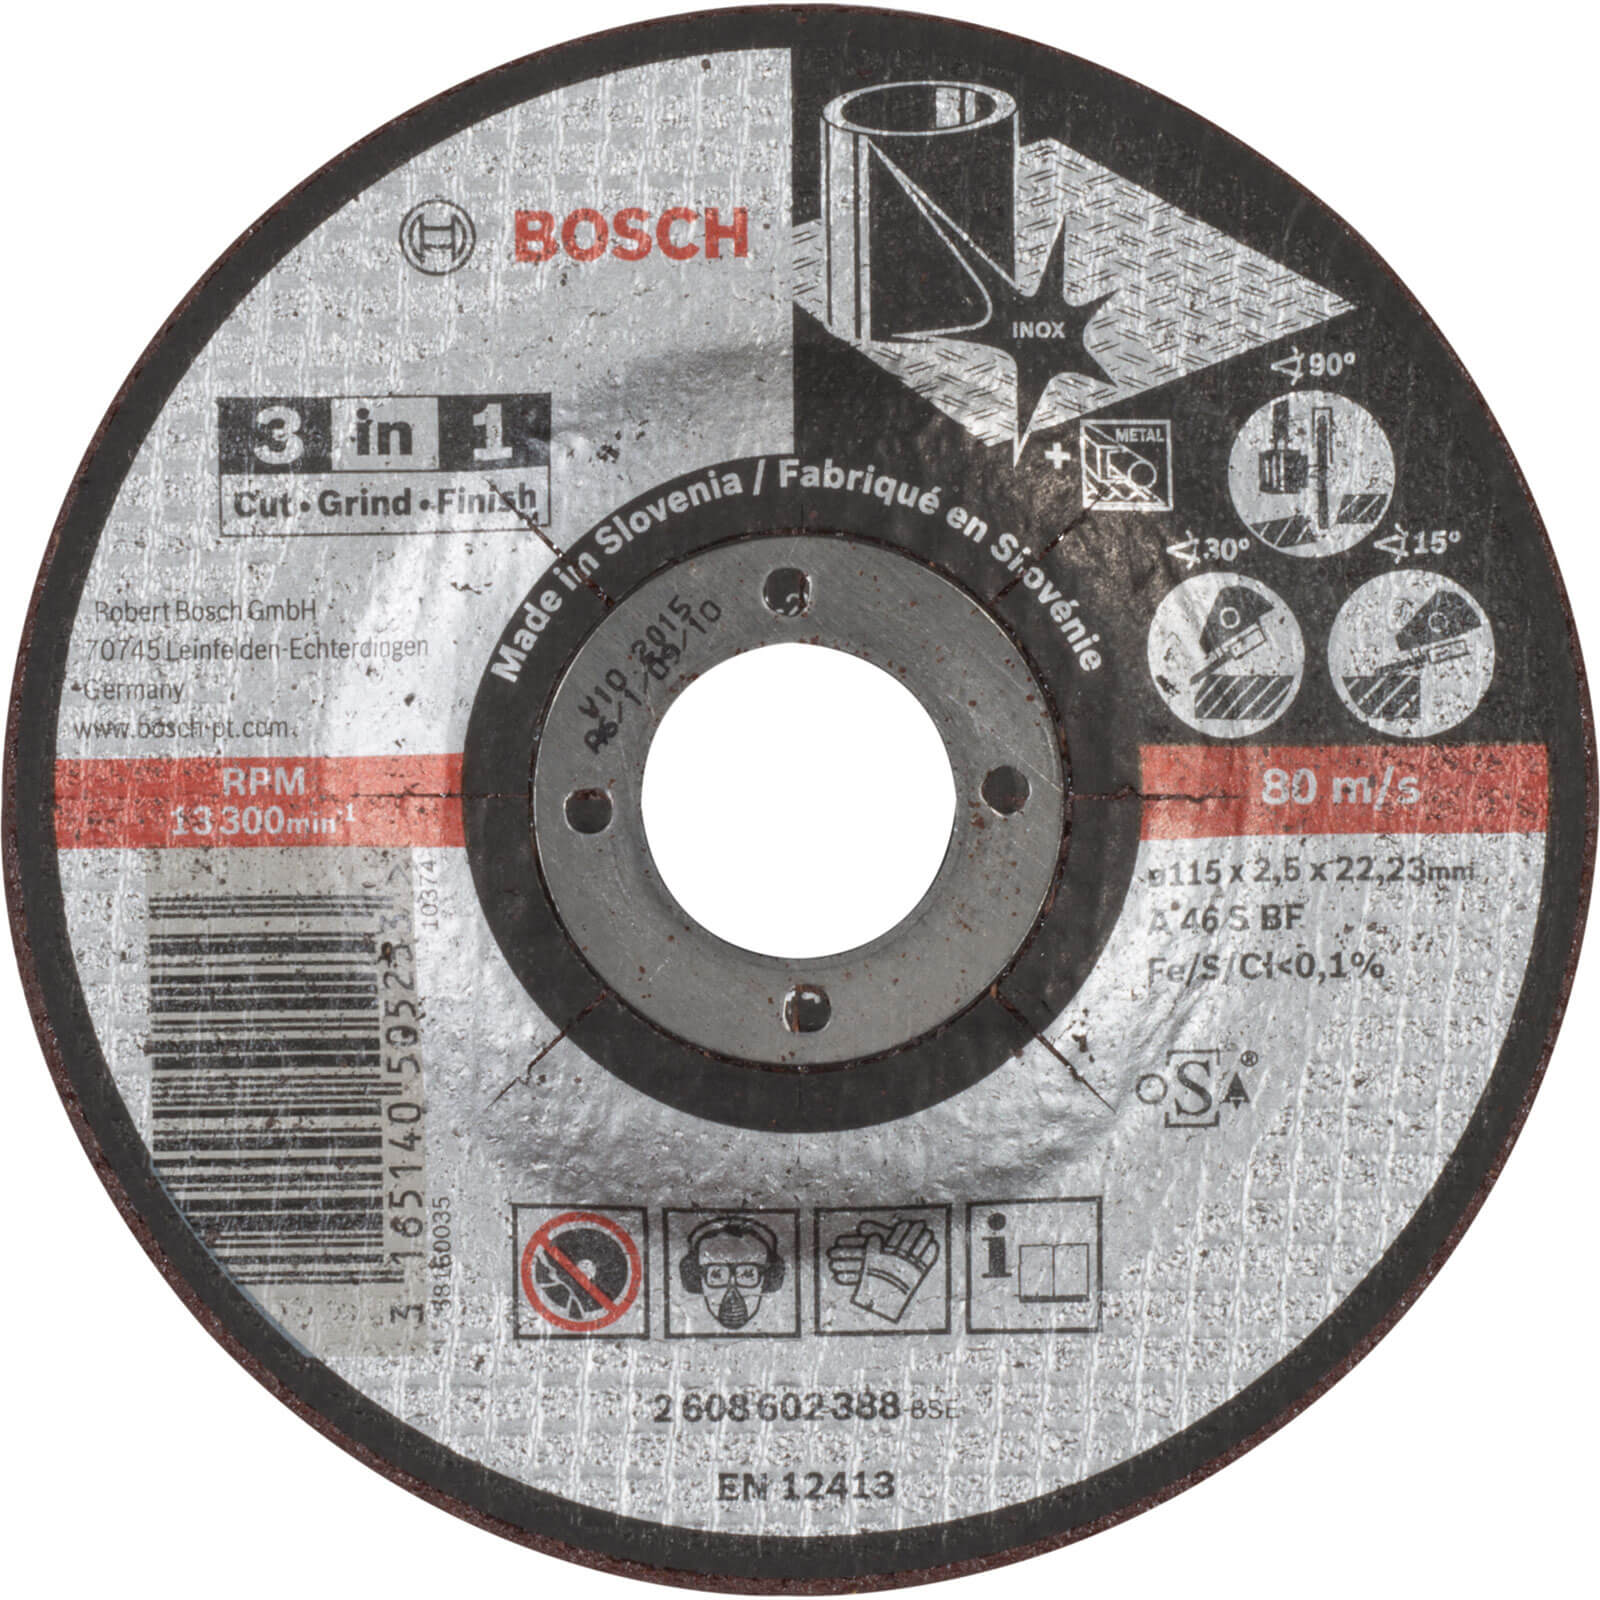 Image of Bosch Depressed Centre 3 in 1 Cutting Grinding Finishing Disc 115mm 2.5mm 22mm